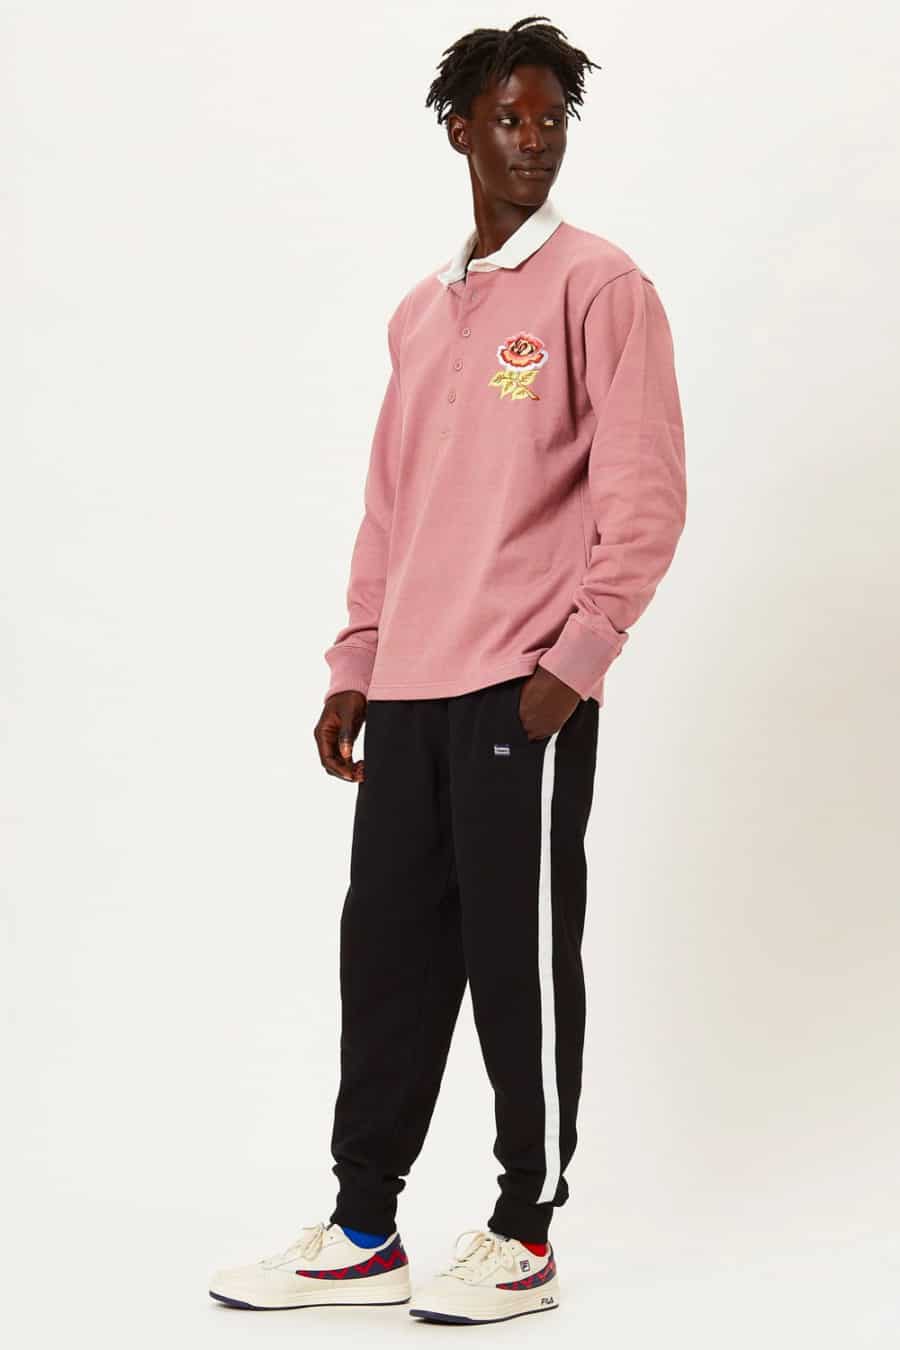 Men's stripe sweatpants, pink rugby shirt and white sneakers outfit